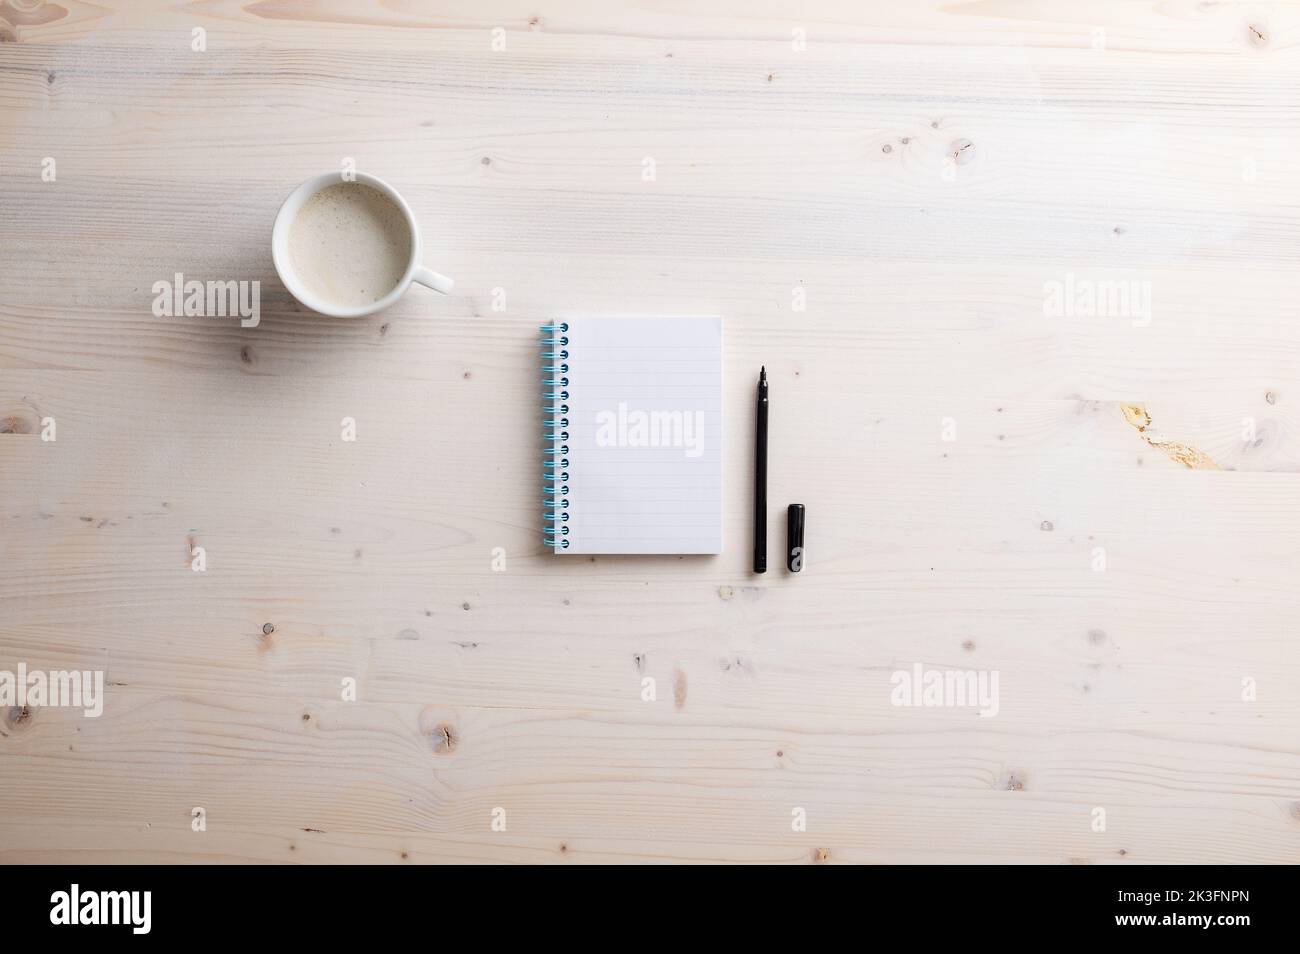 Blank spiral notebook and open black spiral pen placed on simple wooden desk with a cup of fresh coffee. Stock Photo